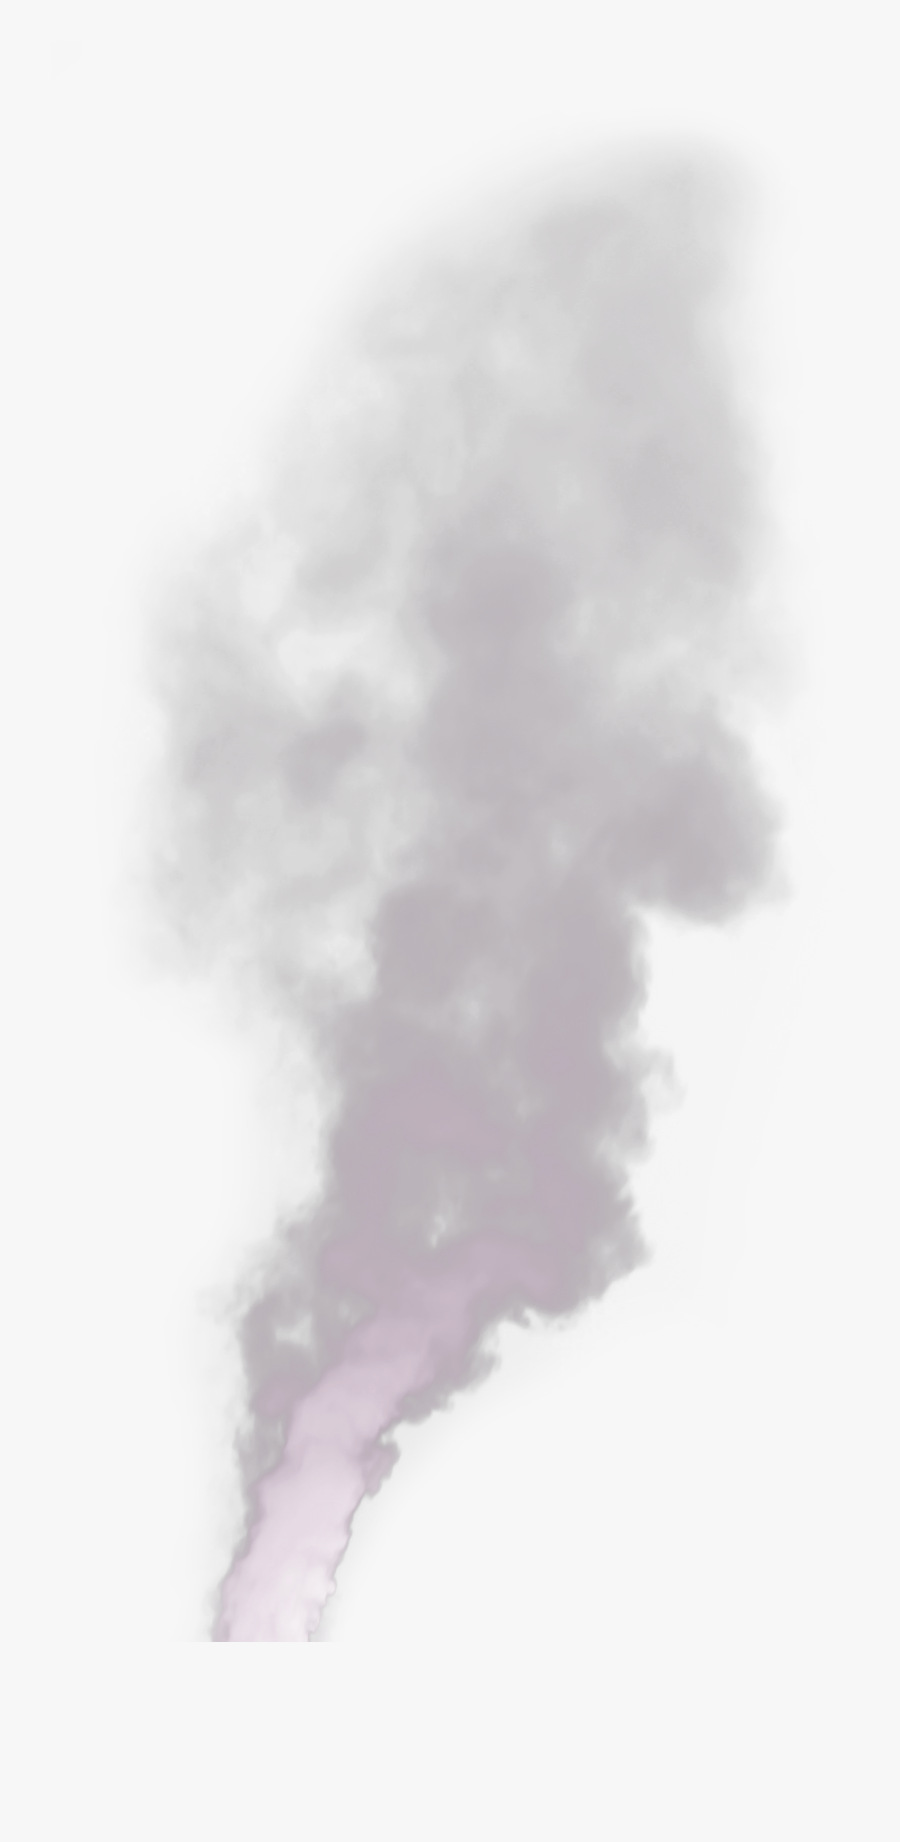 Transparent White Smoke Png Transparent - Smoke From Chimney Png, Transparent Clipart